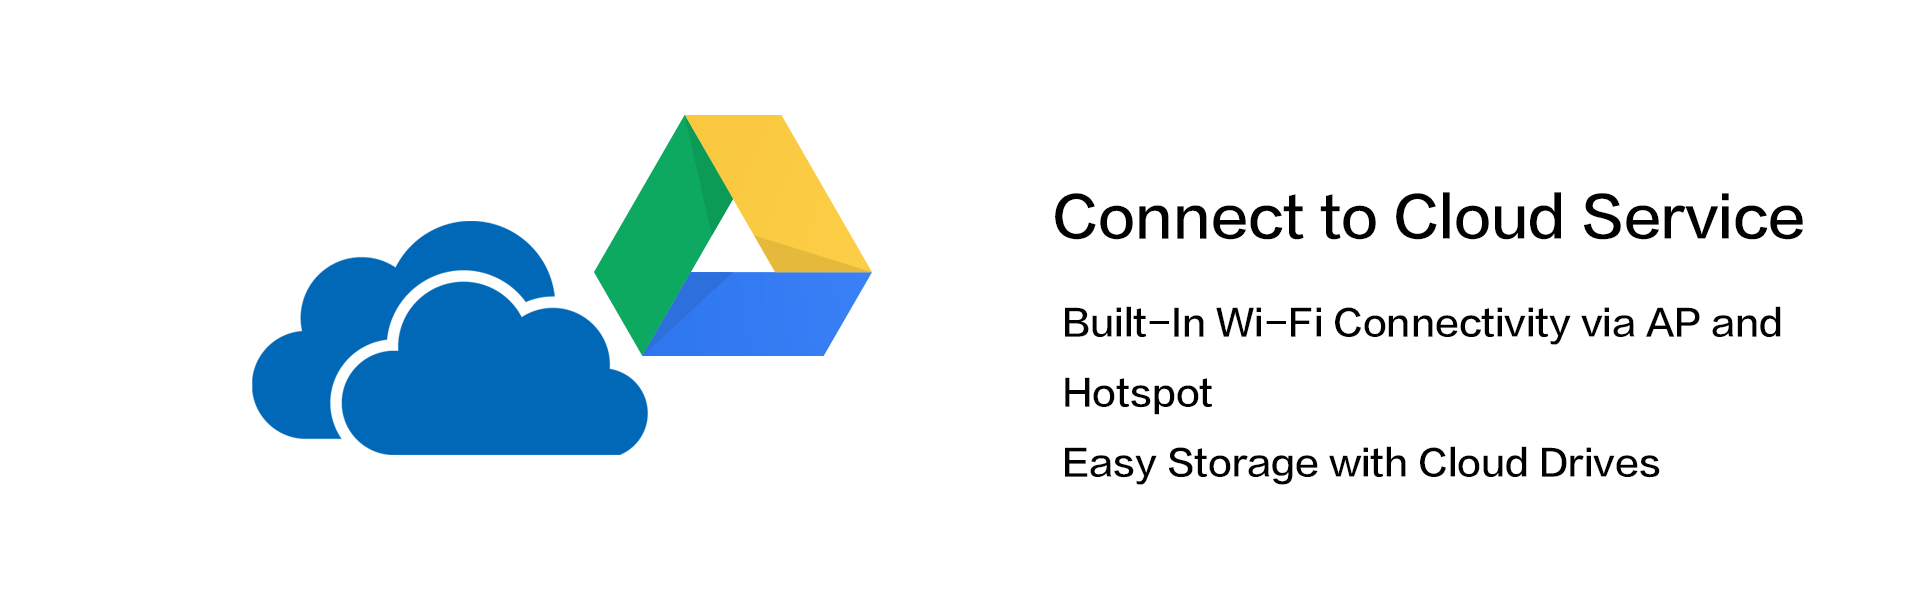 Built-In Wi-Fi Connectivity via AP and Hotspot,Easy Storage with Cloud Drives